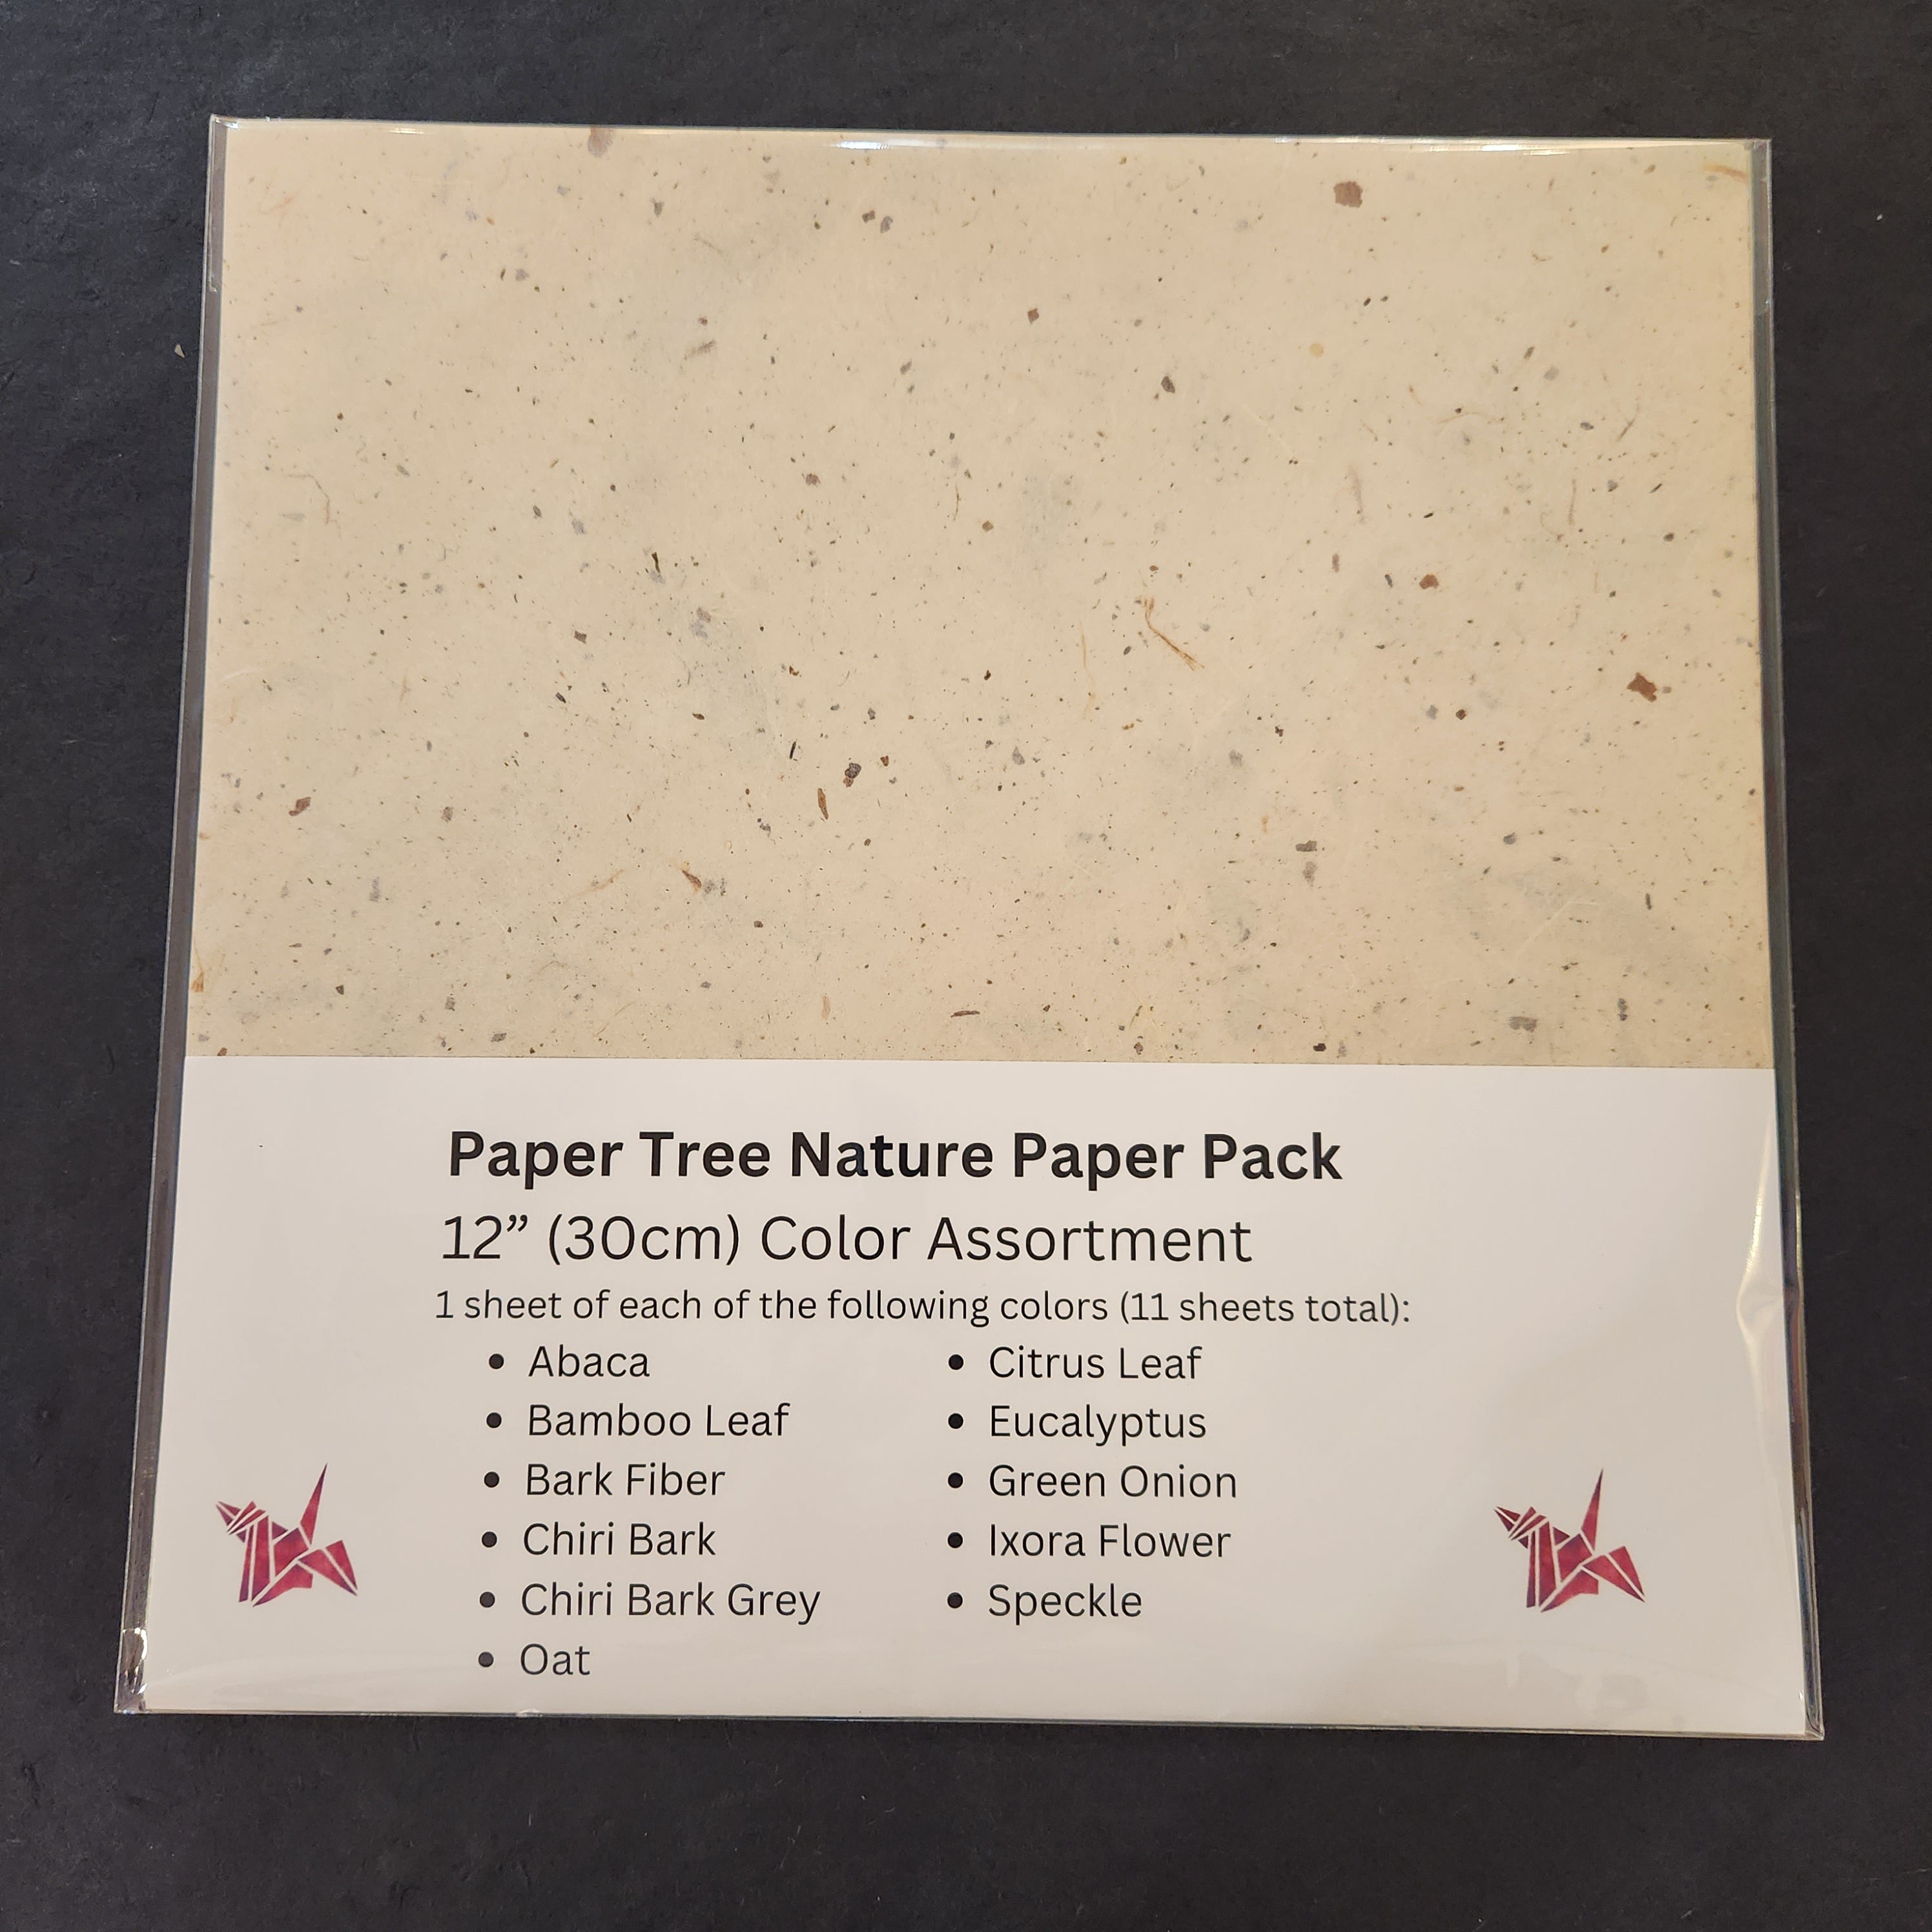 Paper Tree Nature Paper Pack